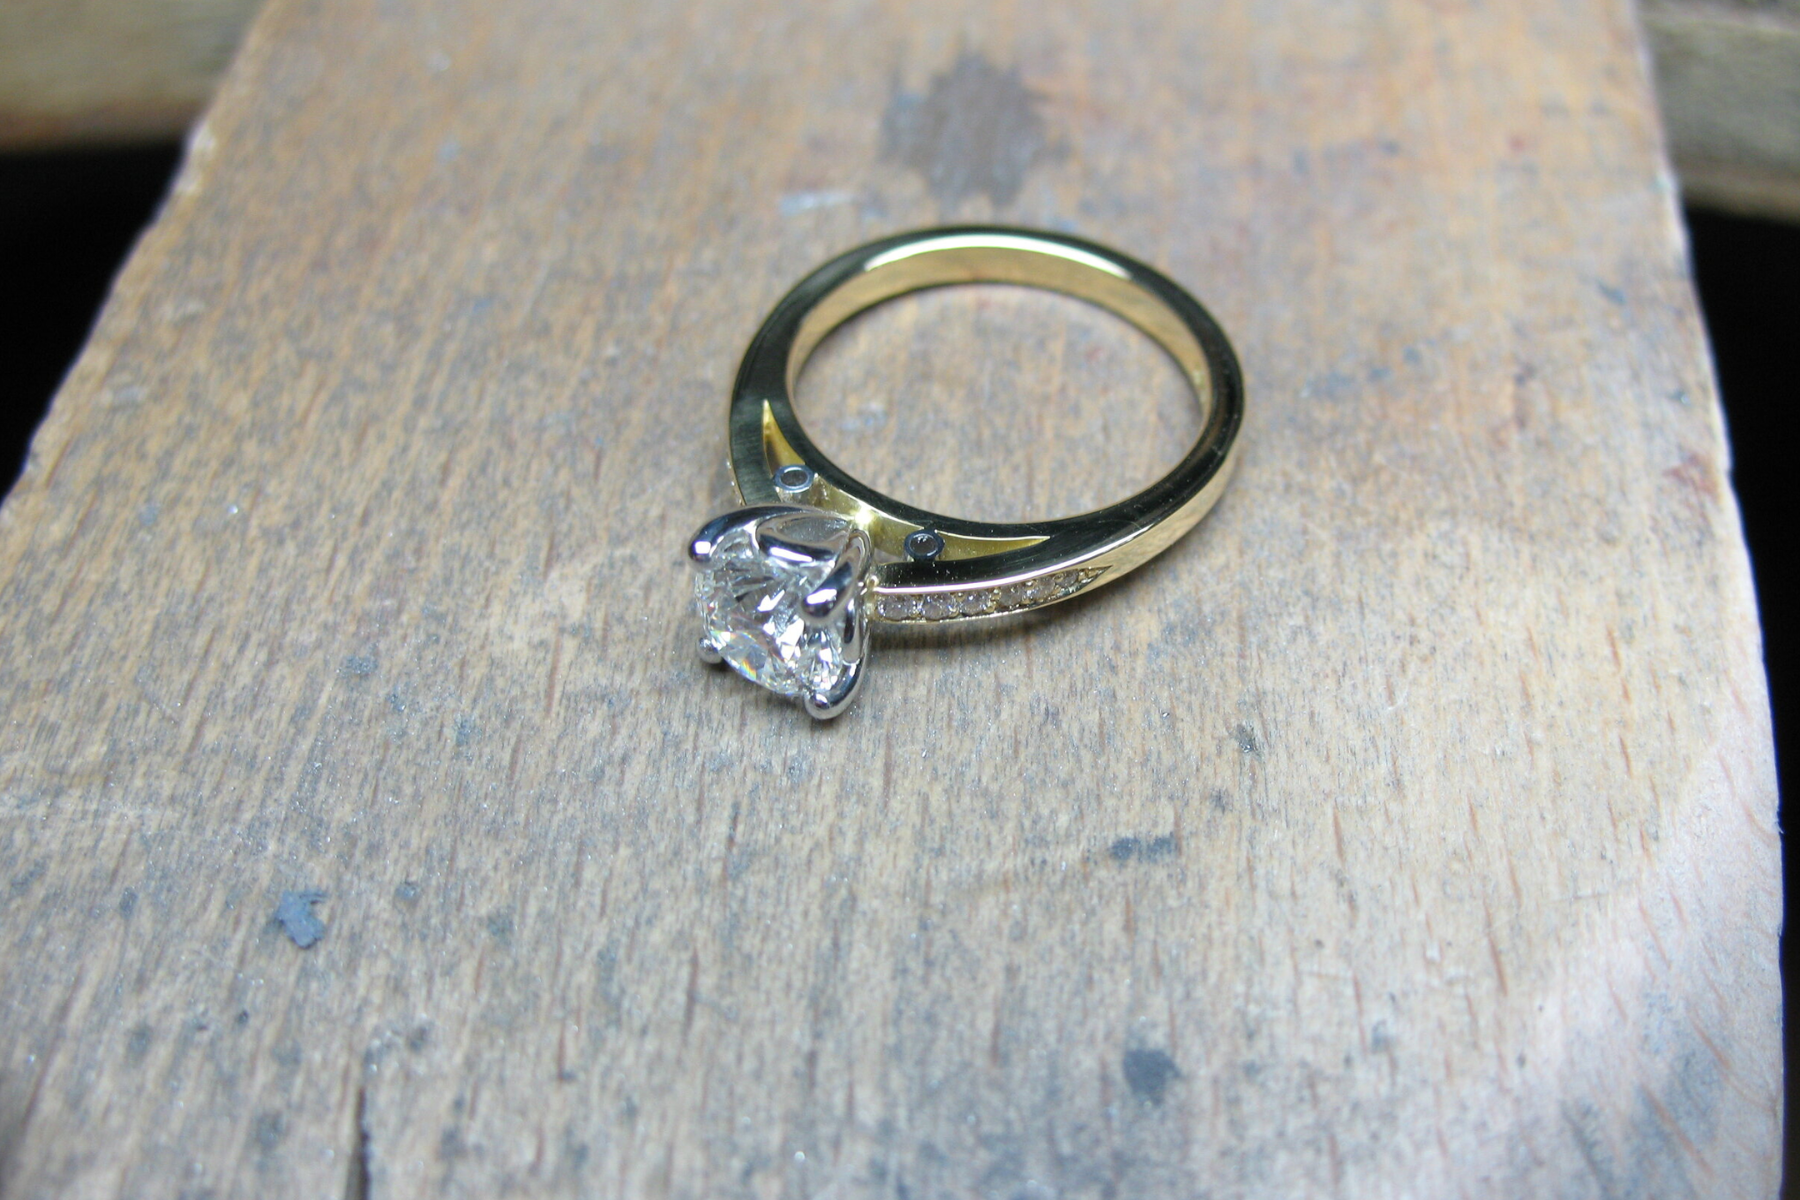 A handcrafted diamond ring on a wooden table